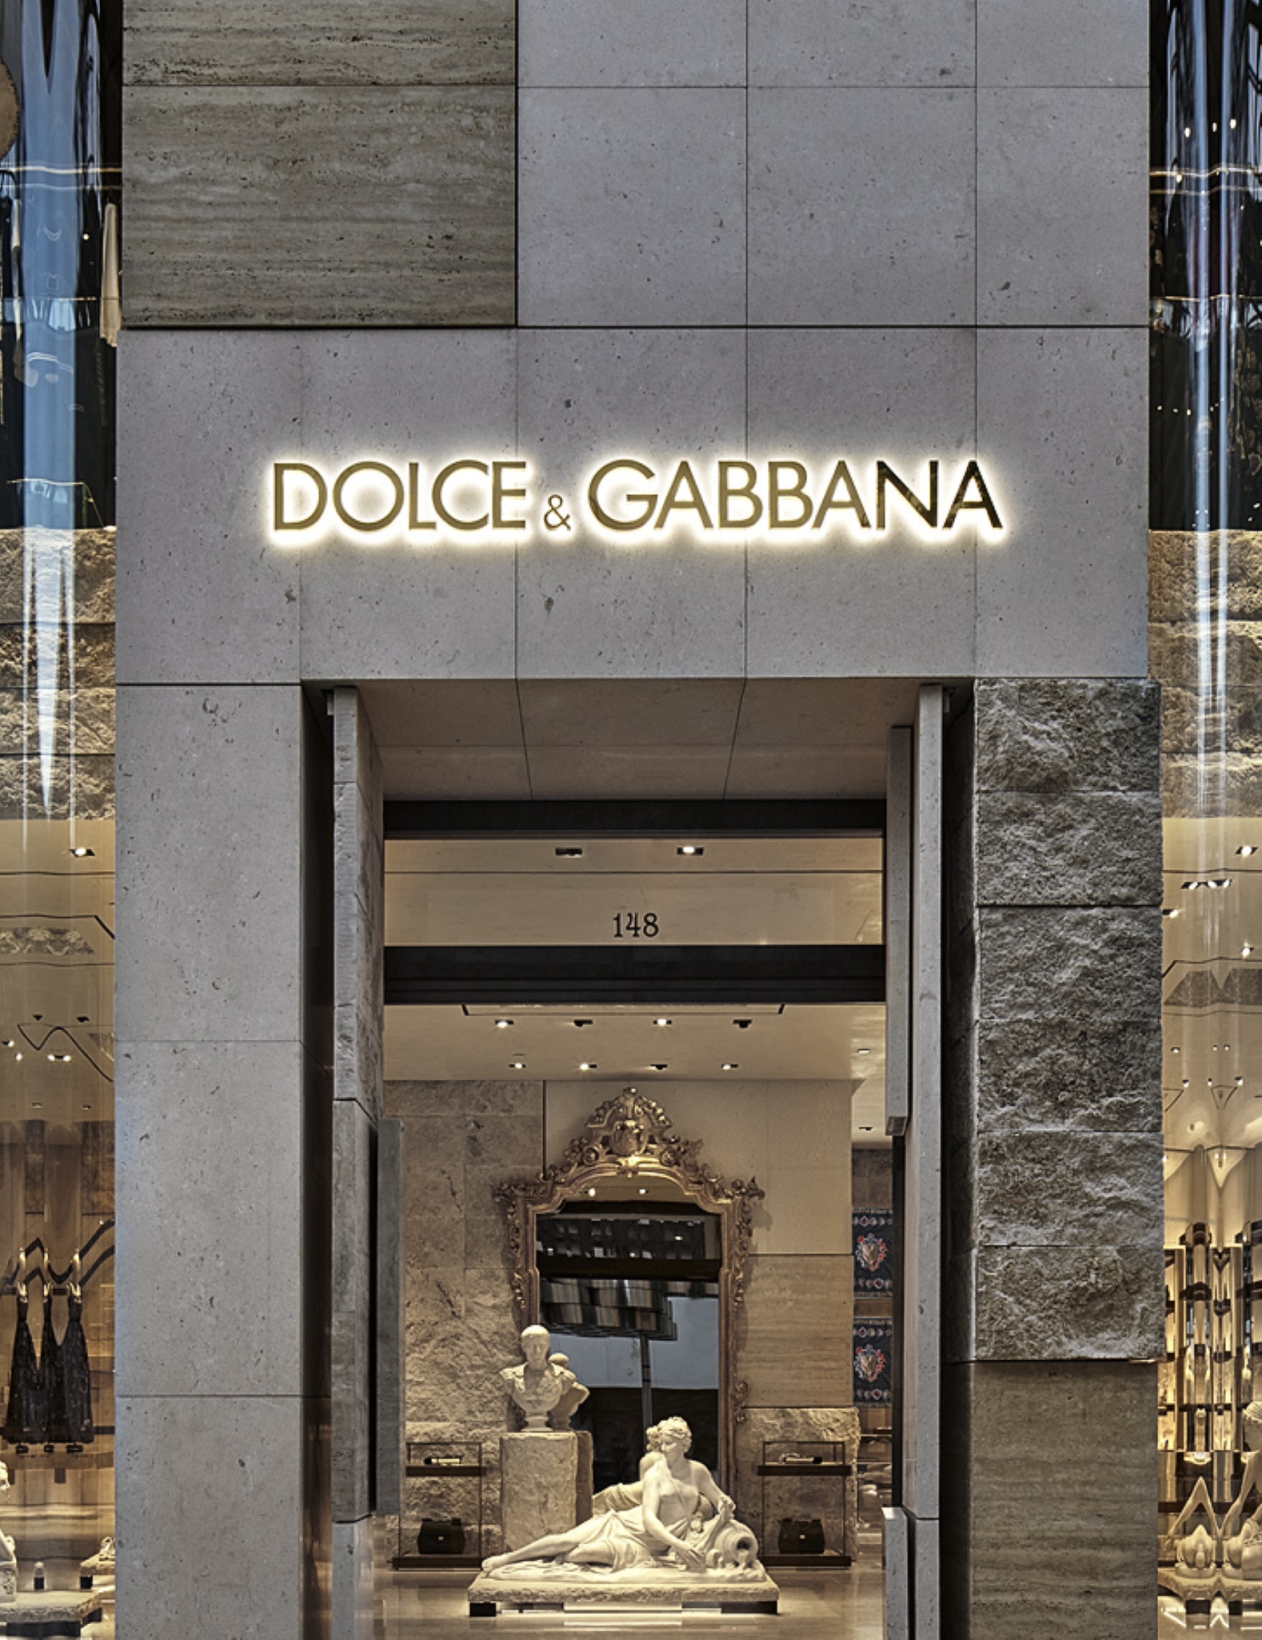 Dolce & Gabbana wants to attract external investors